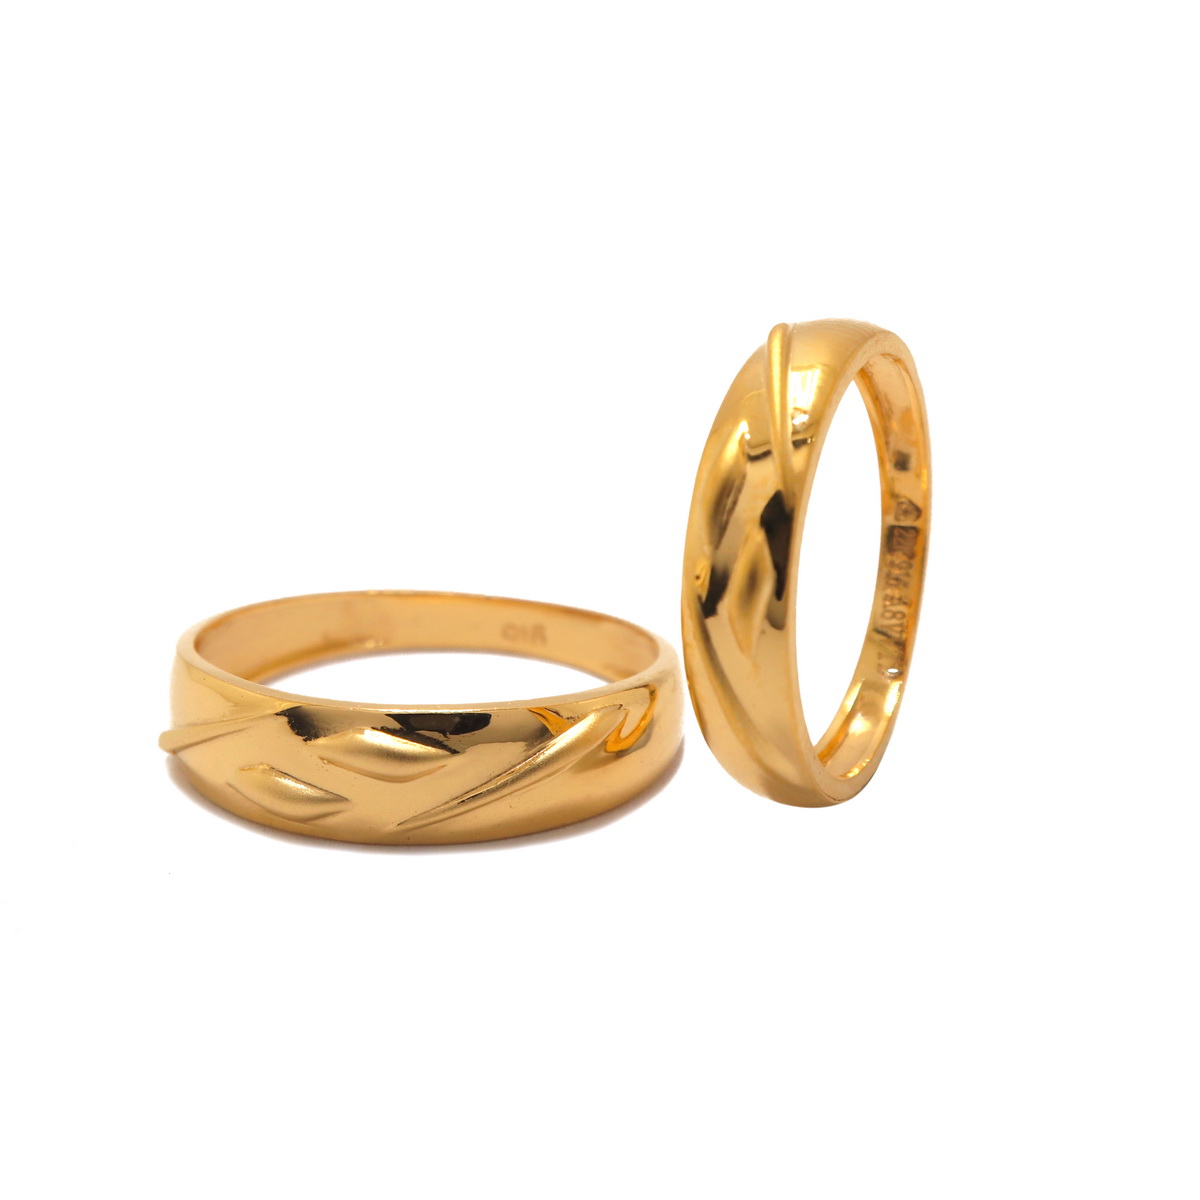 Buy quality 22k yellow gold plain couple rings in Noida